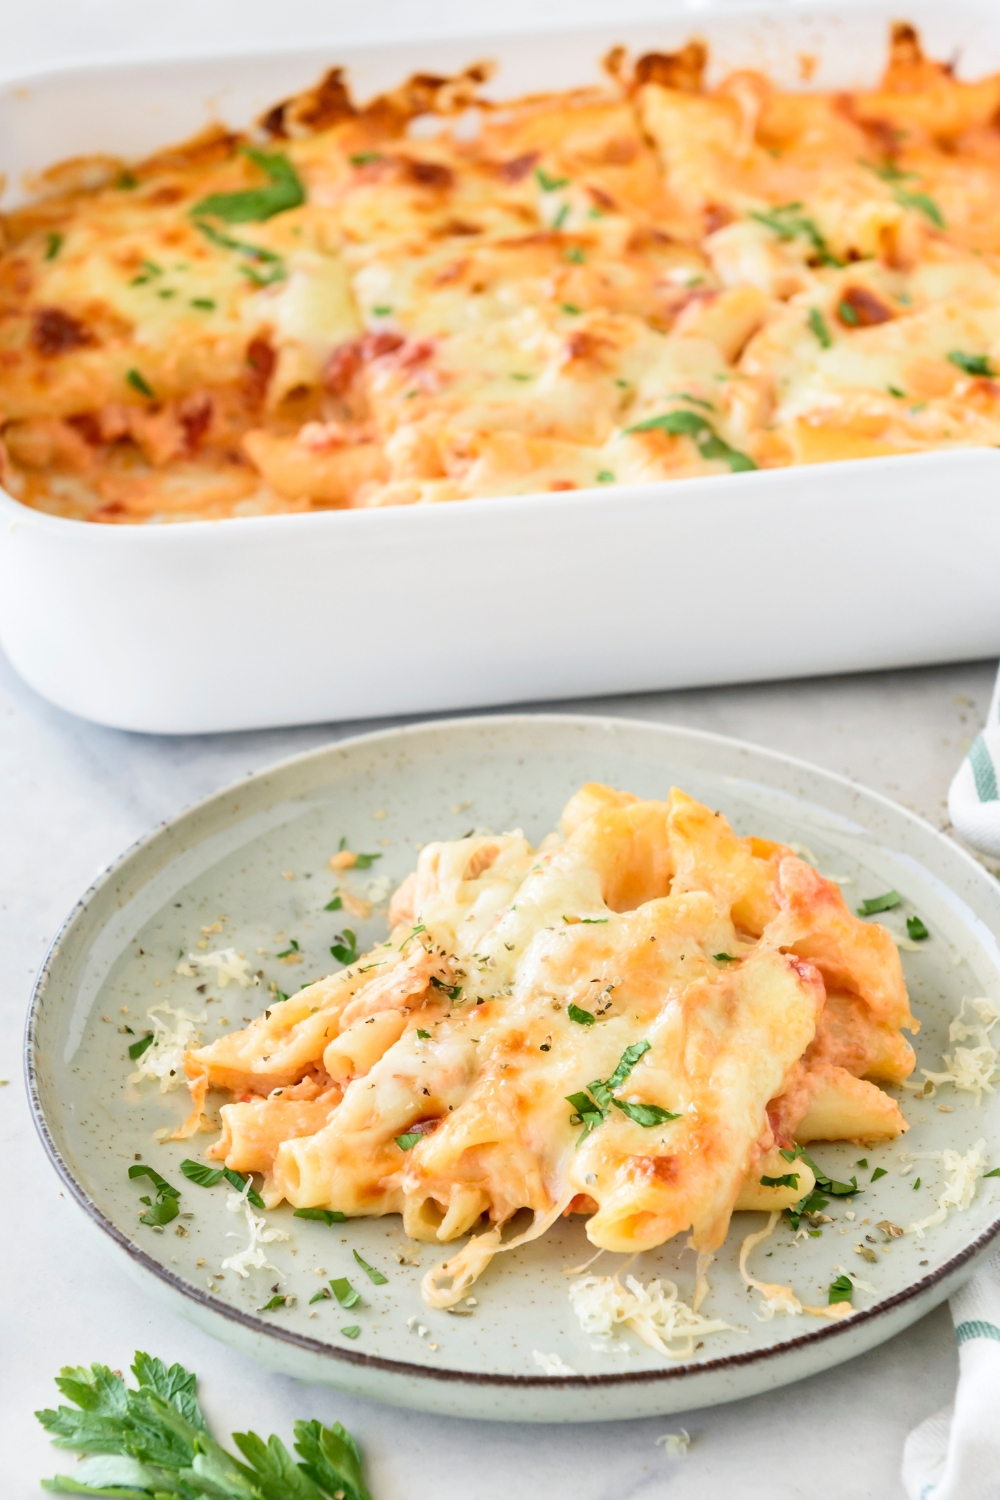 A plate of chicken pasta bake covered in melted cheese and fresh green herbs. The rest of the pasta is in a baking dish in the background.